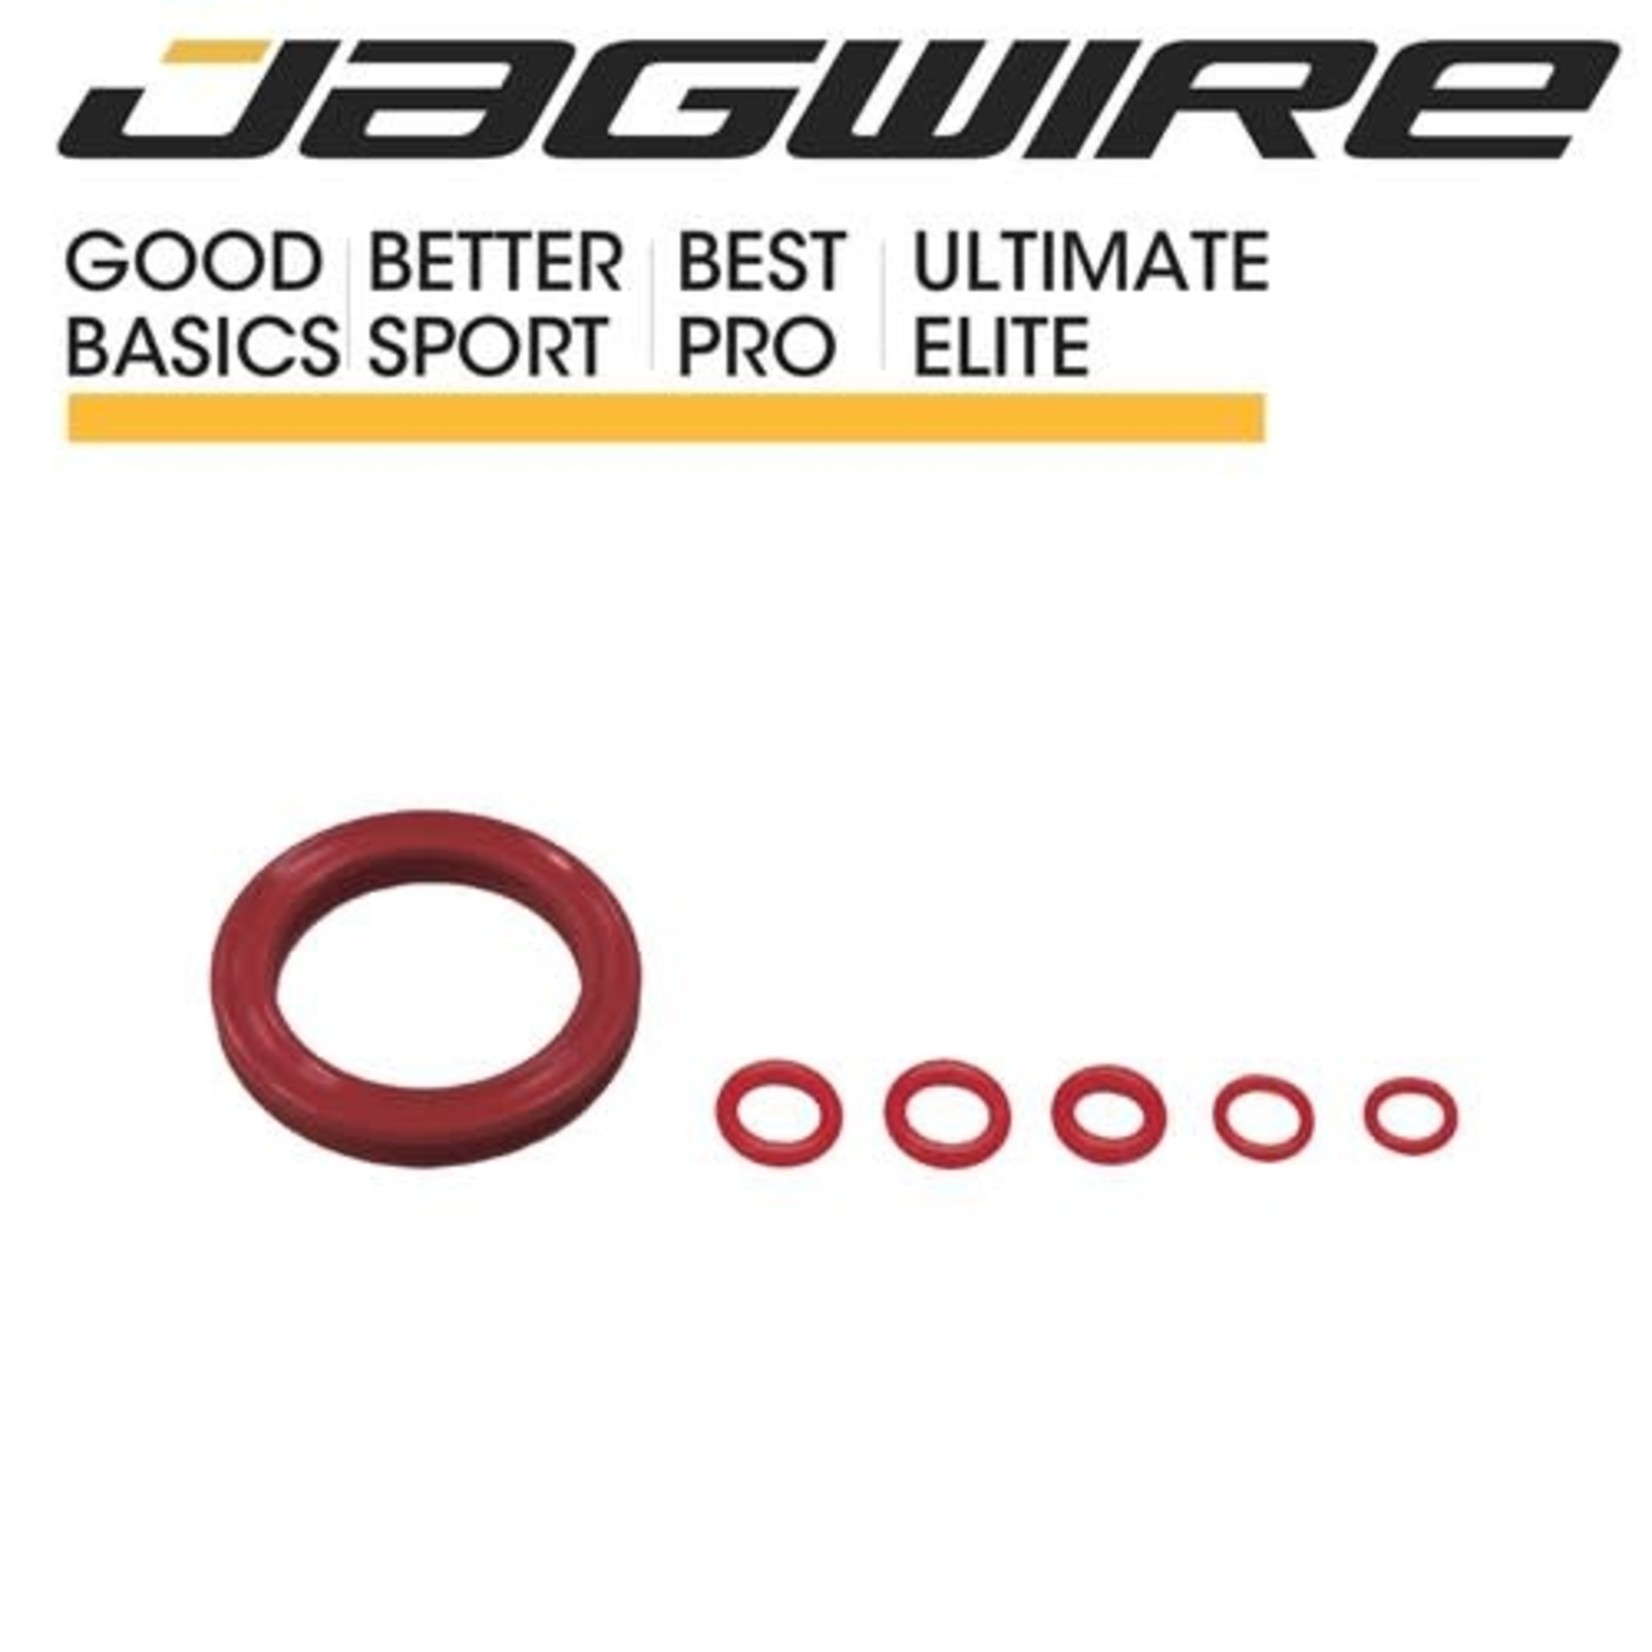 Jagwire Jagwire Elite Dot Bleed Kit Replacement O-Rings - Red